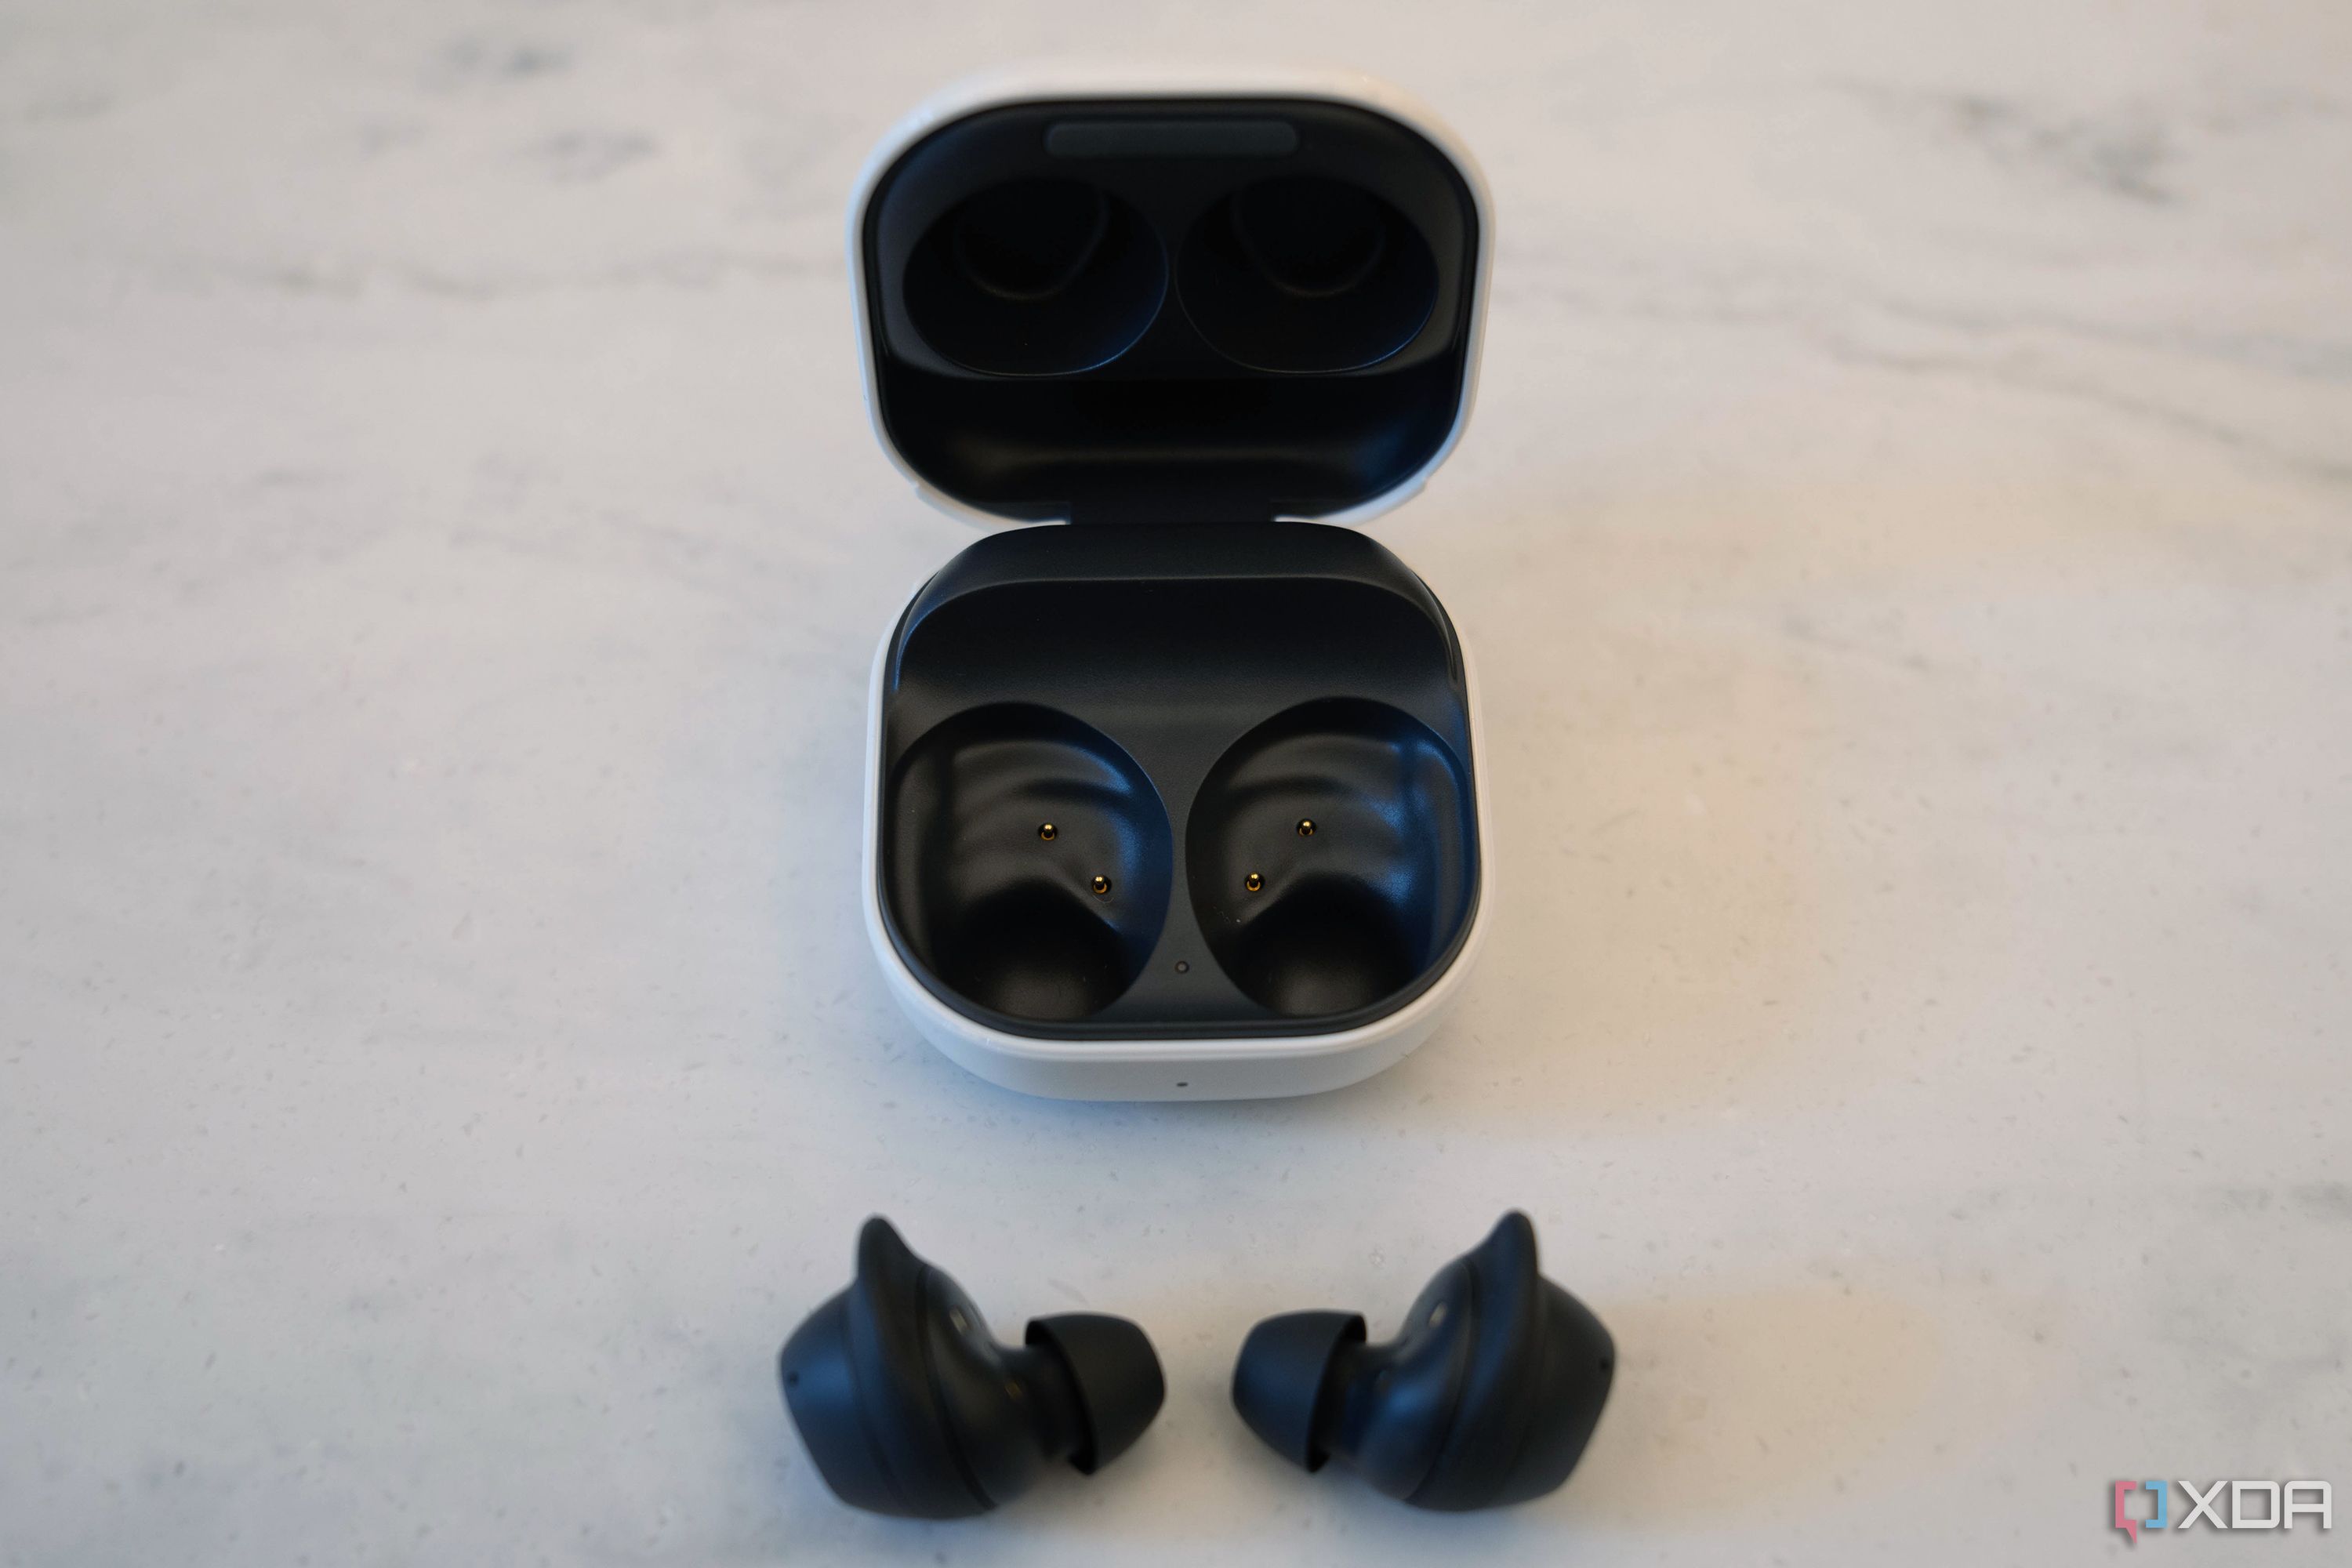 Samsung Galaxy Buds FE vs Galaxy Buds 2 Pro - Which Earbuds Are Better? -  UBG